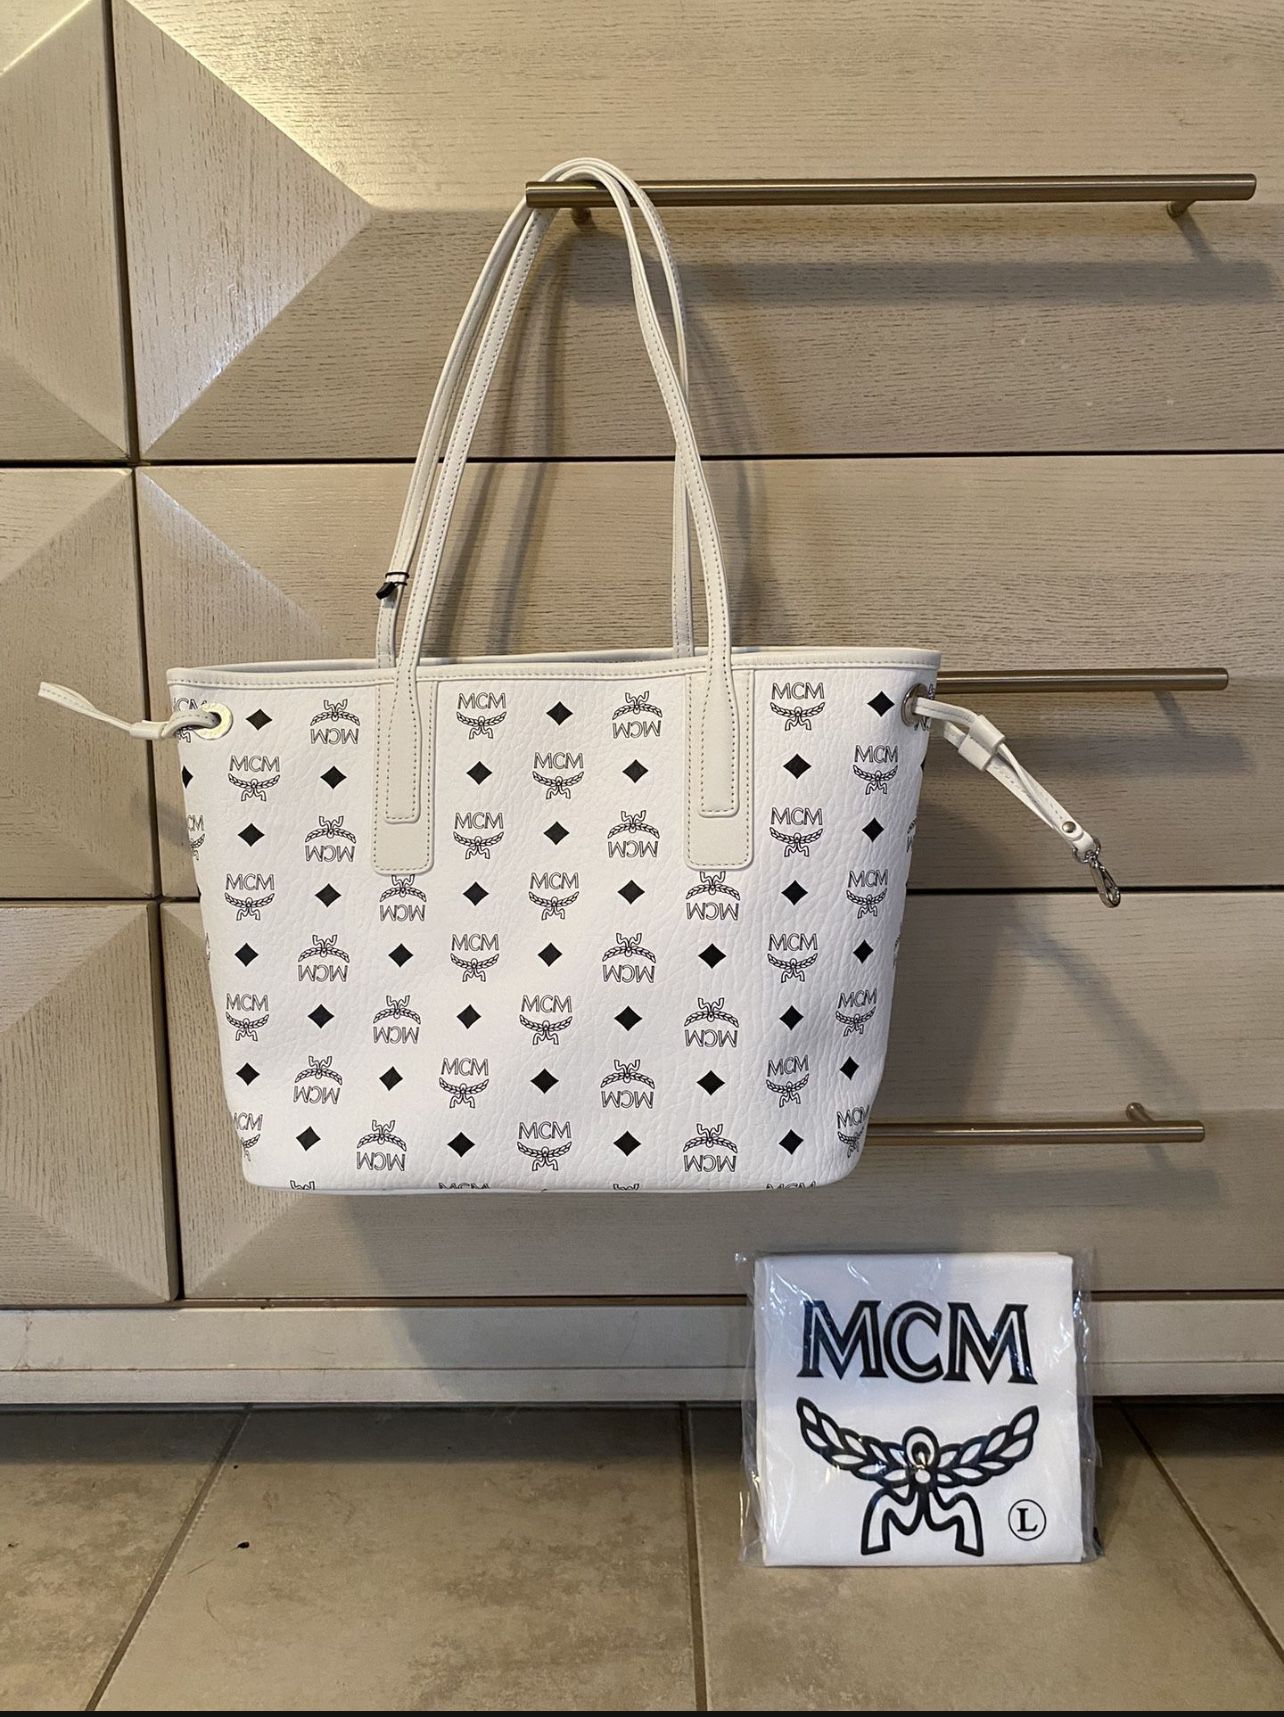 Brand New Mcm Bags They're Real With The Price Tag Still On Them for Sale  in Bloomington, CA - OfferUp